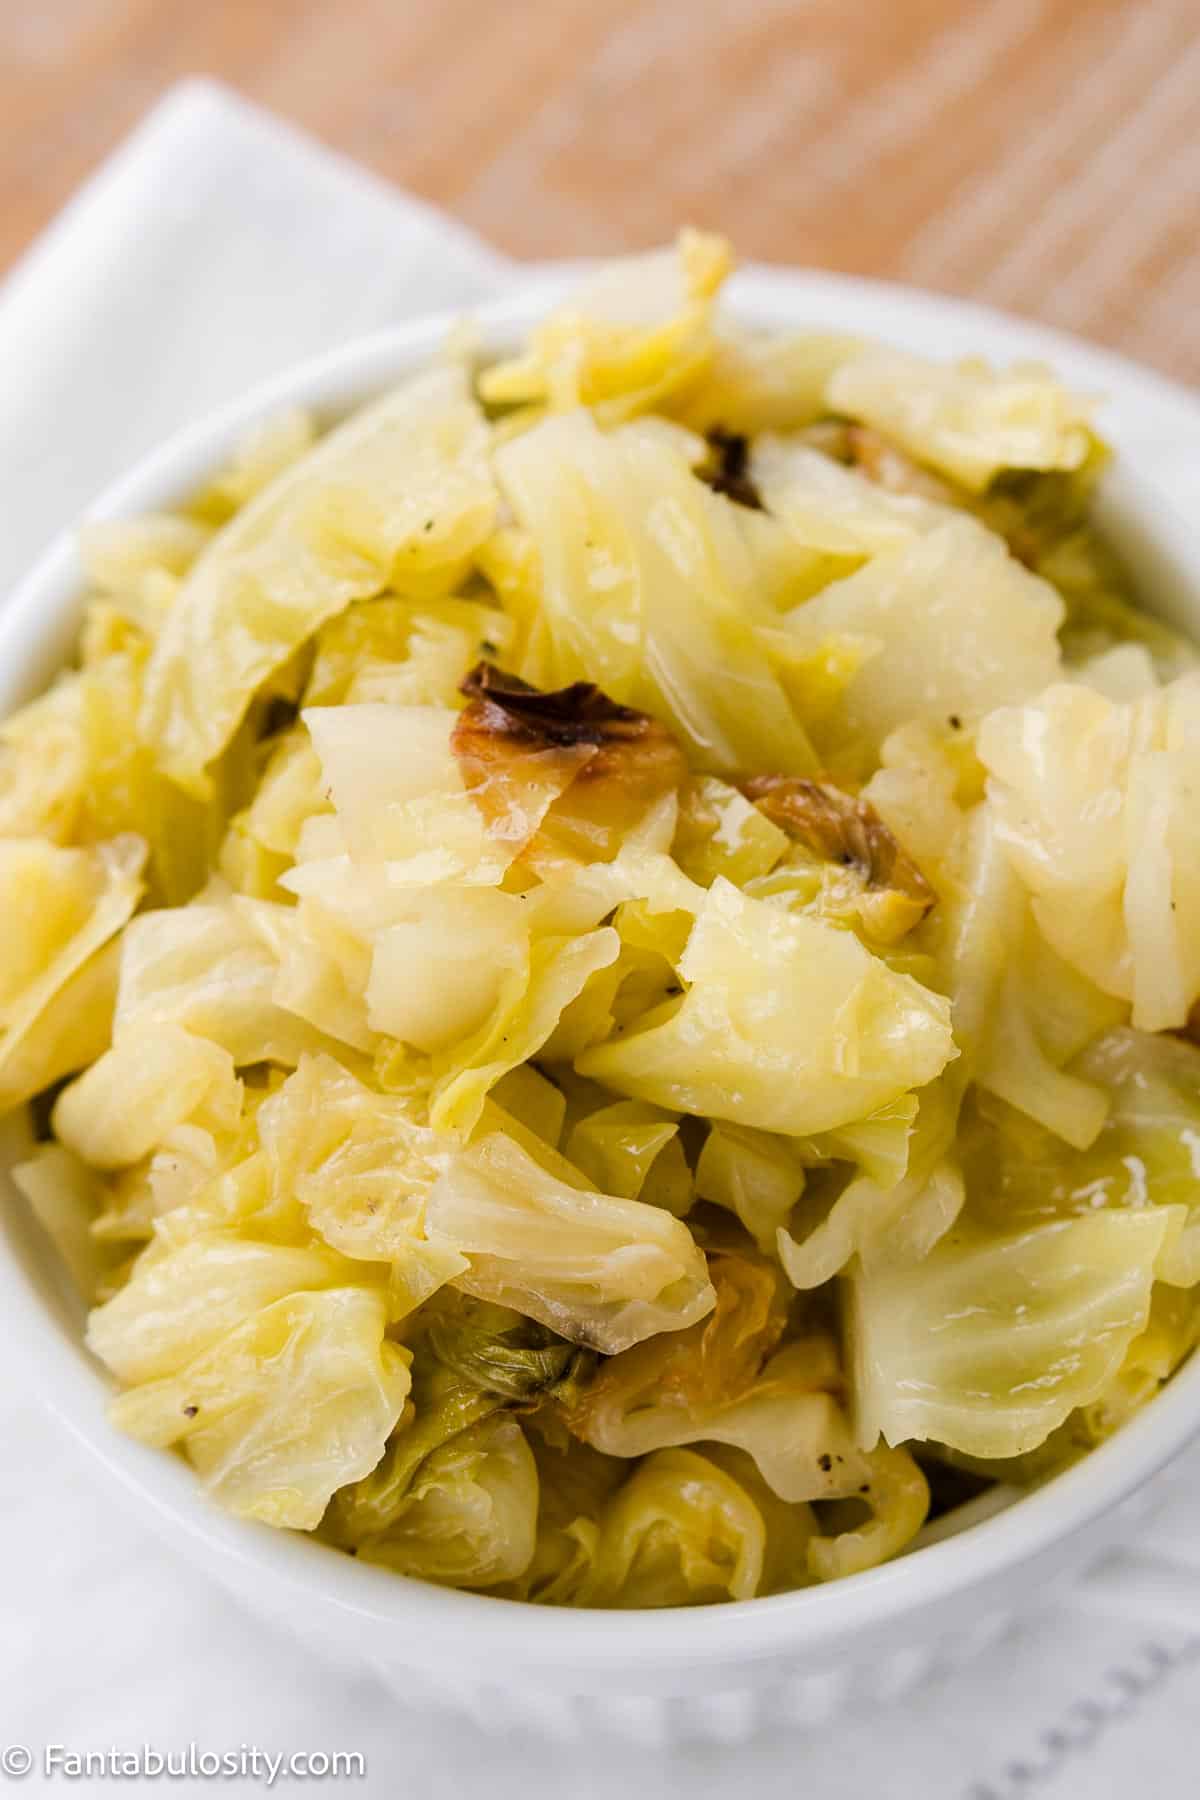 Cooked cabbage in a small white bowl.